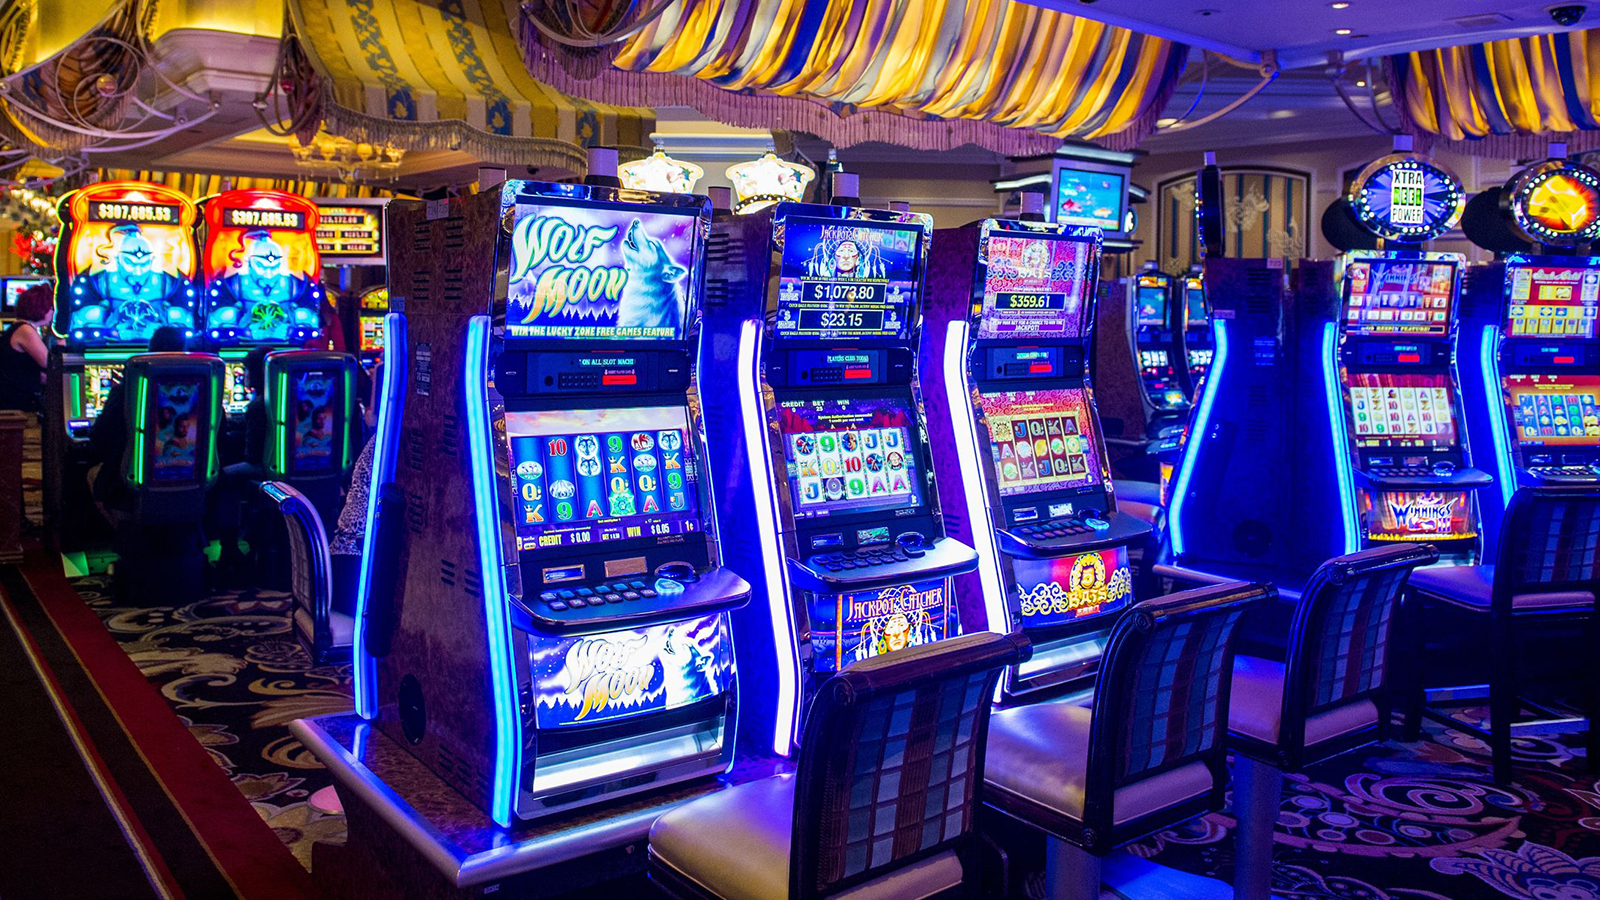 Real money slot machines are not only to play, but to earn money